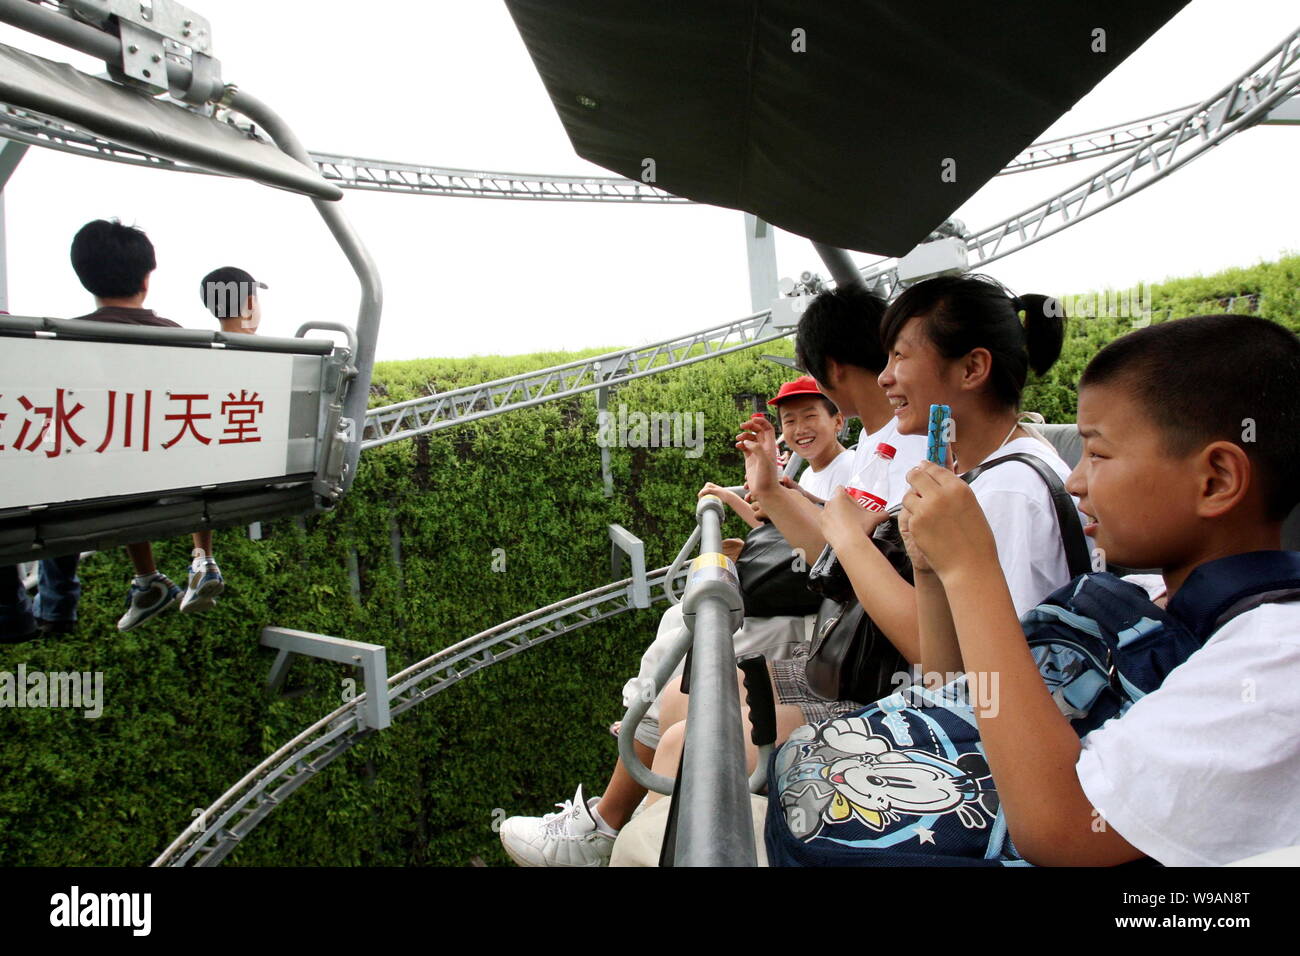 Visitors sit on the Titlis Mountain chair lifts in the Switzerland Pavilion in the World Expo Park in Shanghai, China, 10 July 2010. Stock Photo